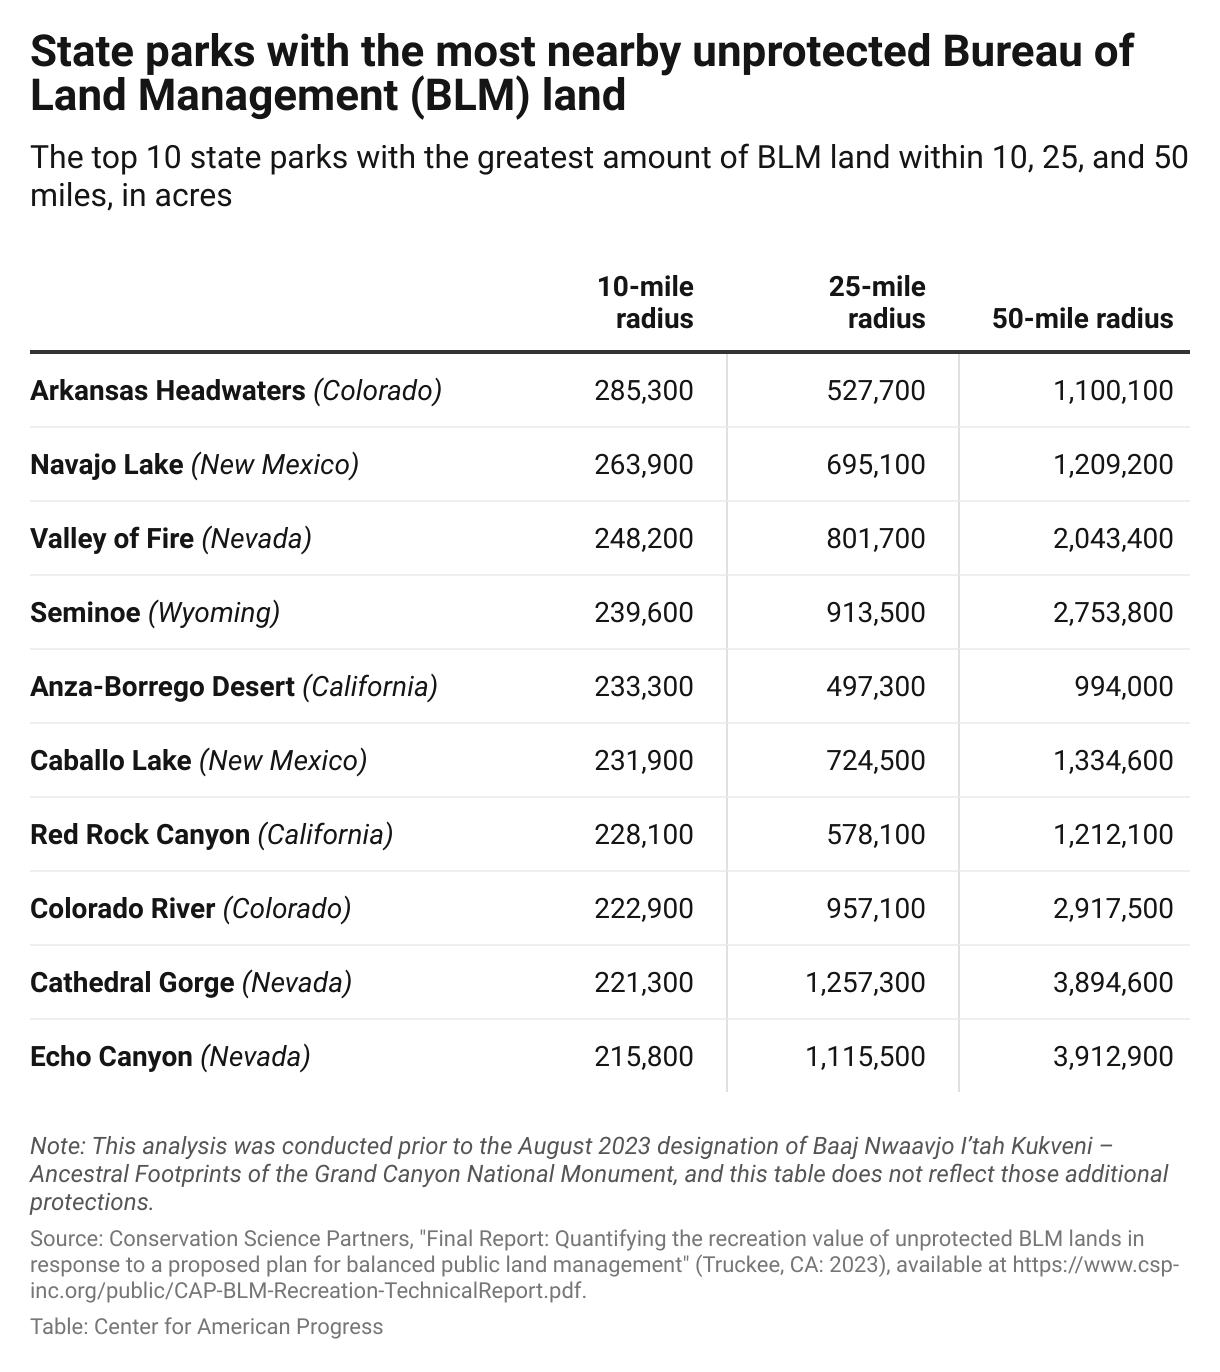 Table highlighting state parks with substantial unprotected BLM land in close proximity. Arkansas Headwaters State Park in Colorado is surrounded by more than 1 million acres of unprotected BLM lands.